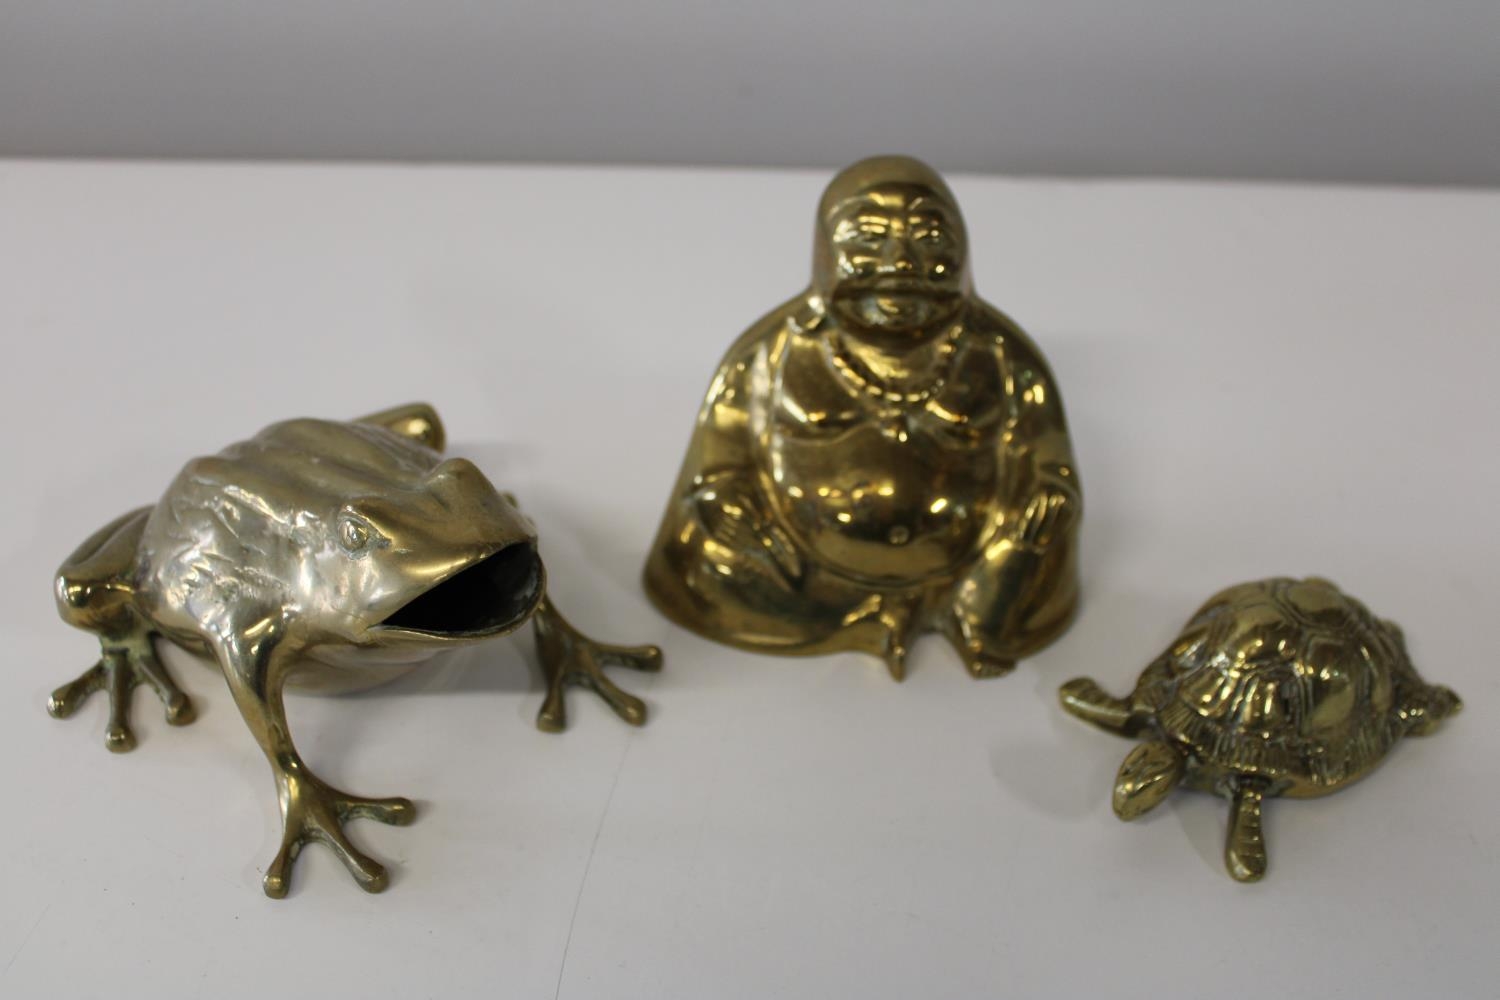 Three pieces of novelty brass ware